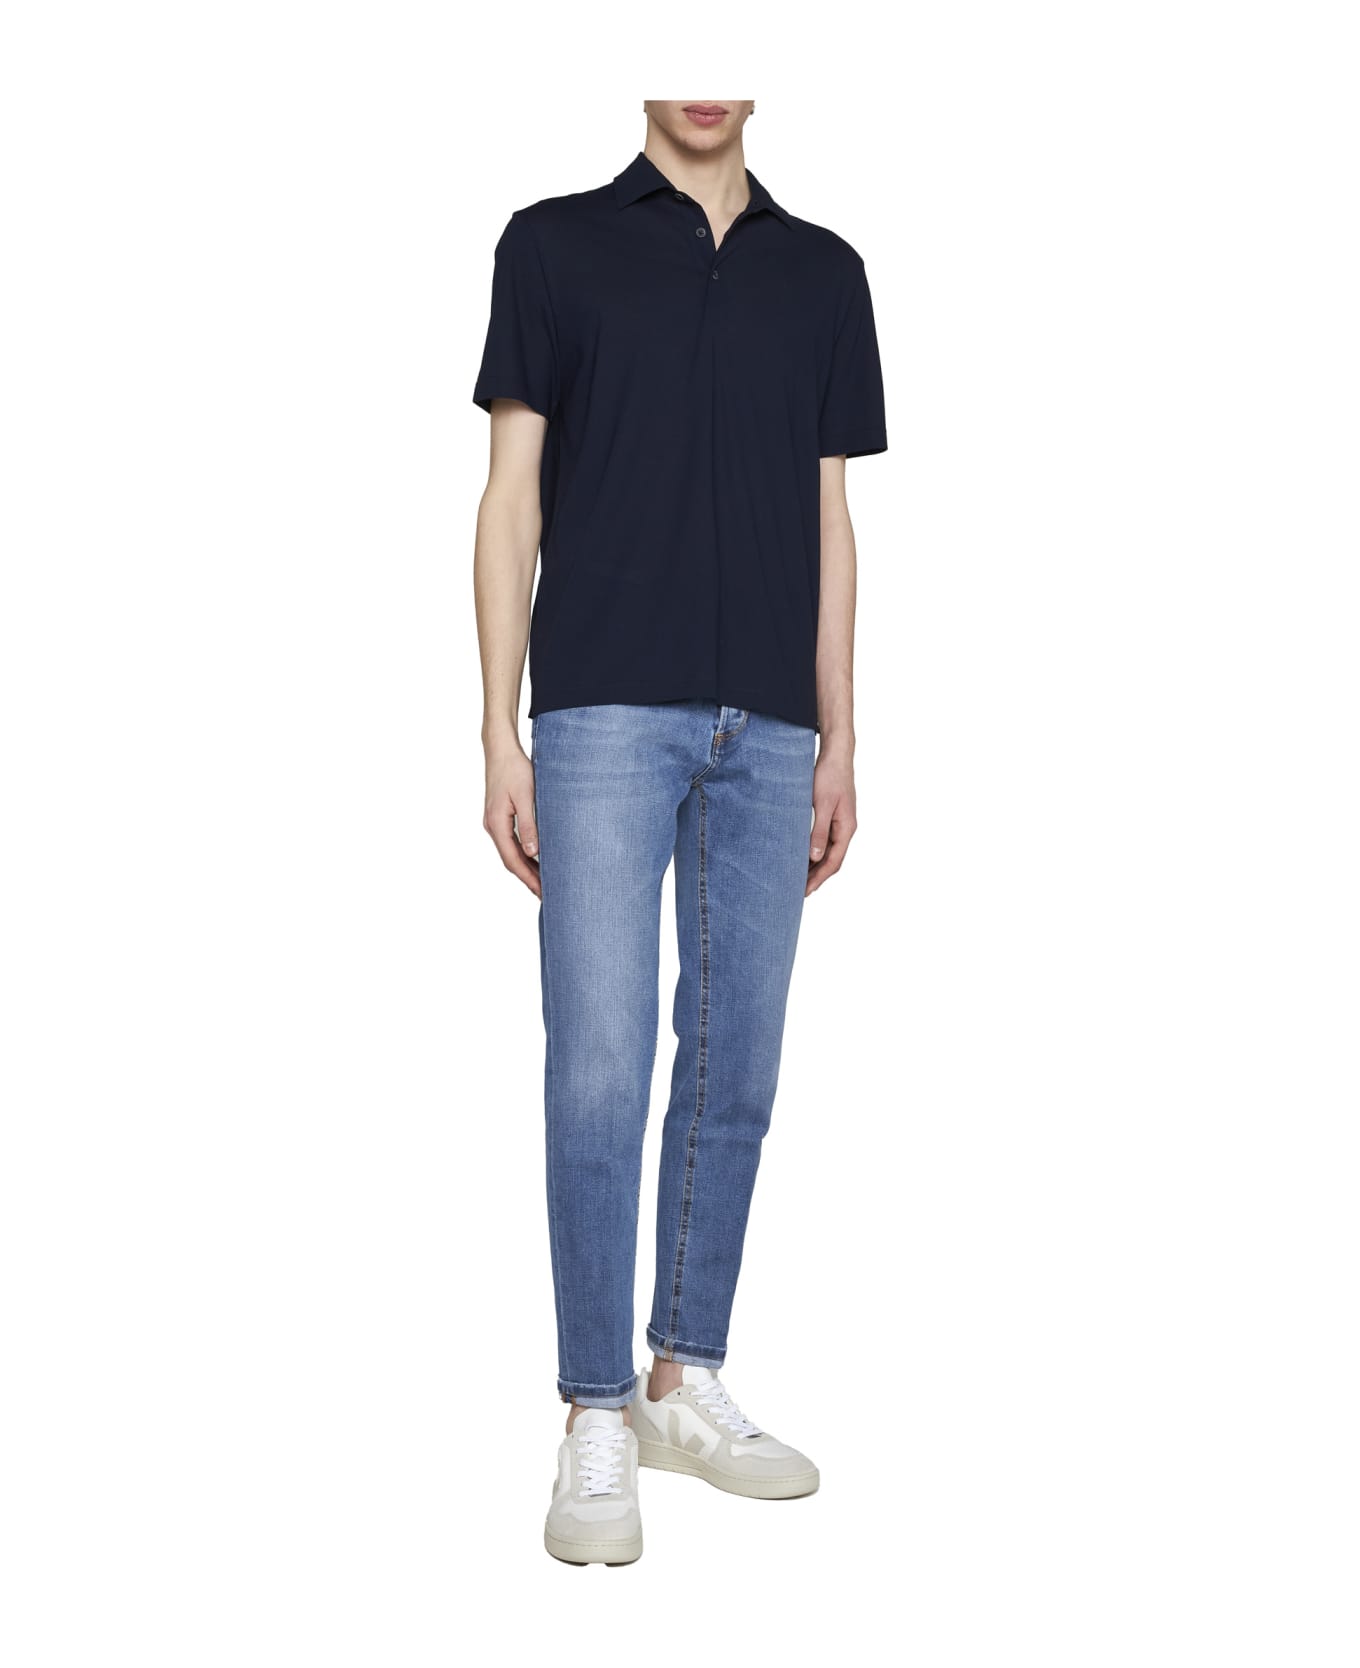 Herno Cotton Jersey Polo Shirt - blue ポロシャツ